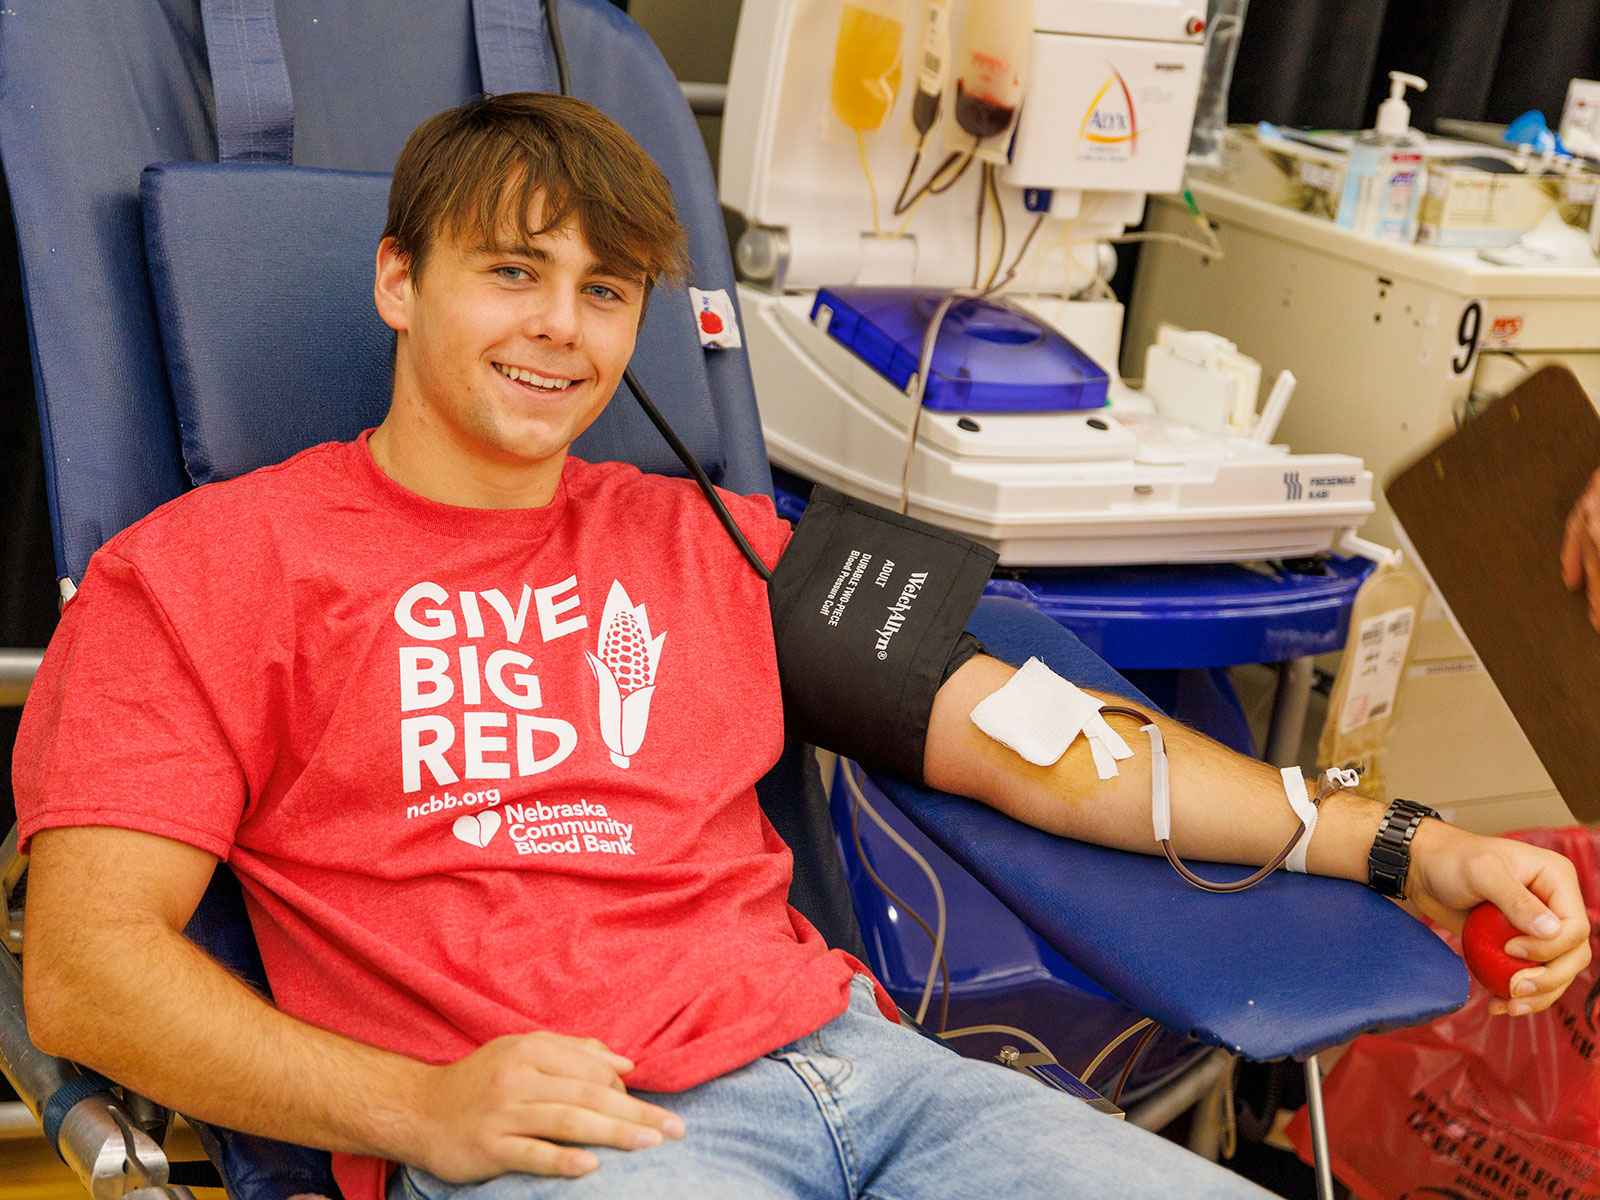 A student gives blood during a campus blood drive